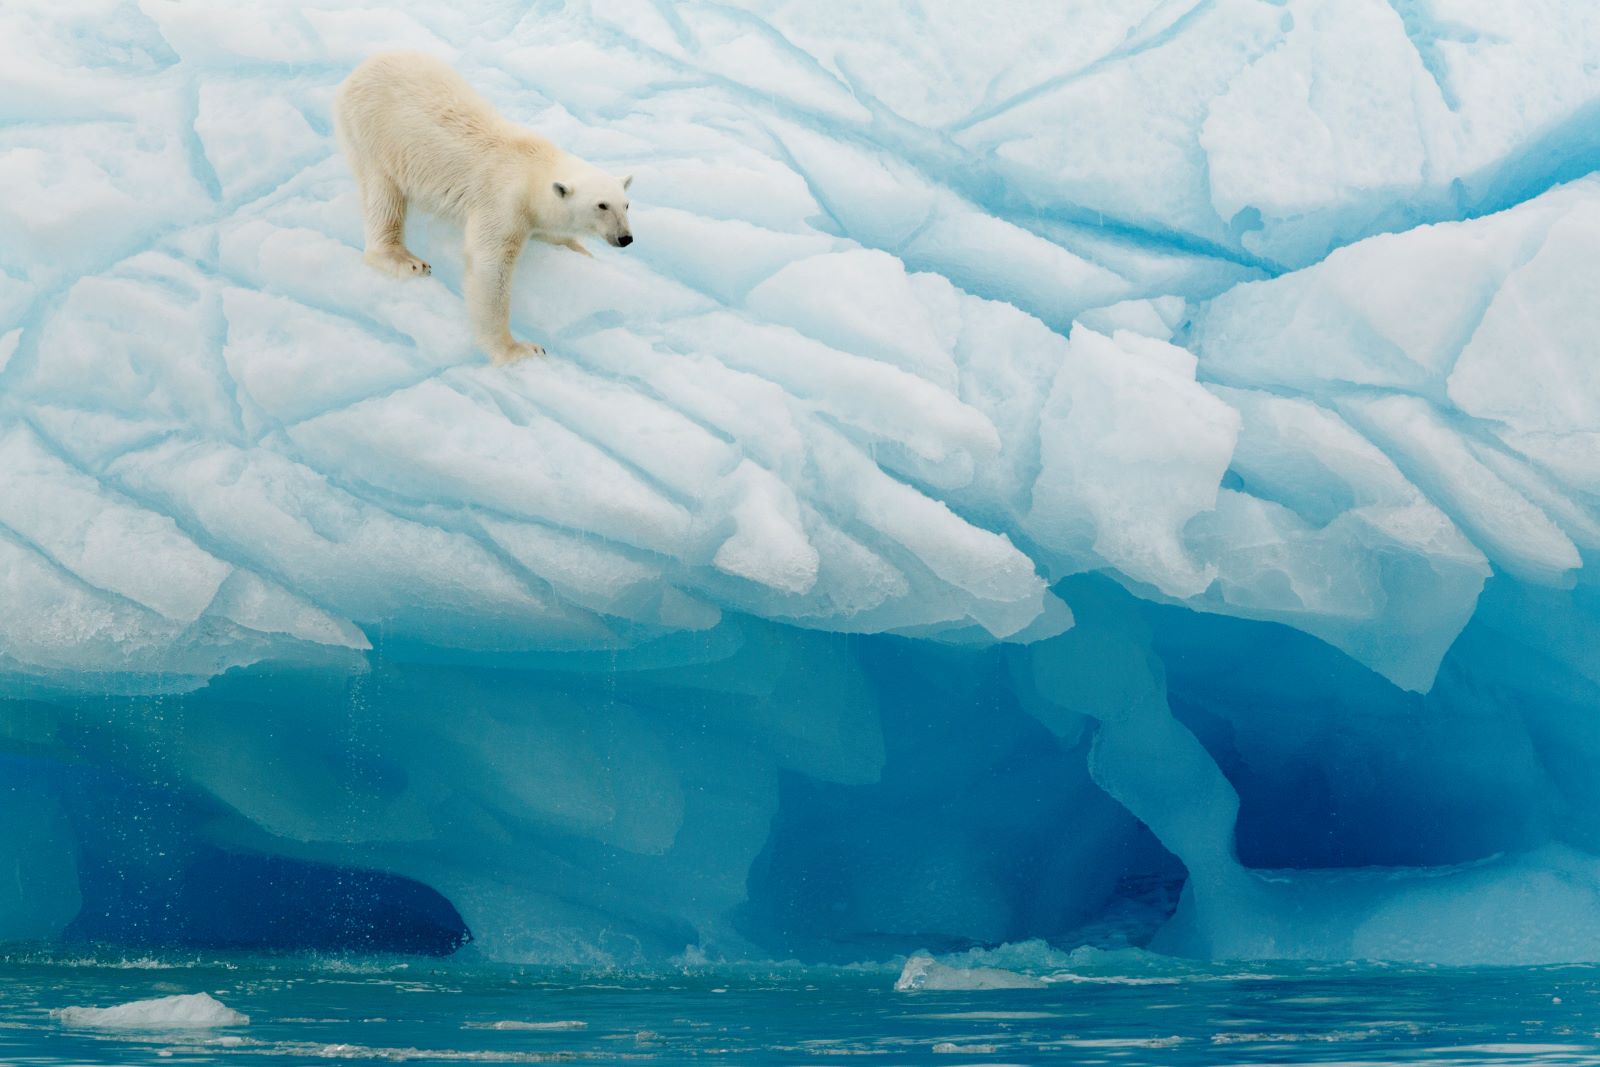 A polar bear scaling the ice in the Arctic